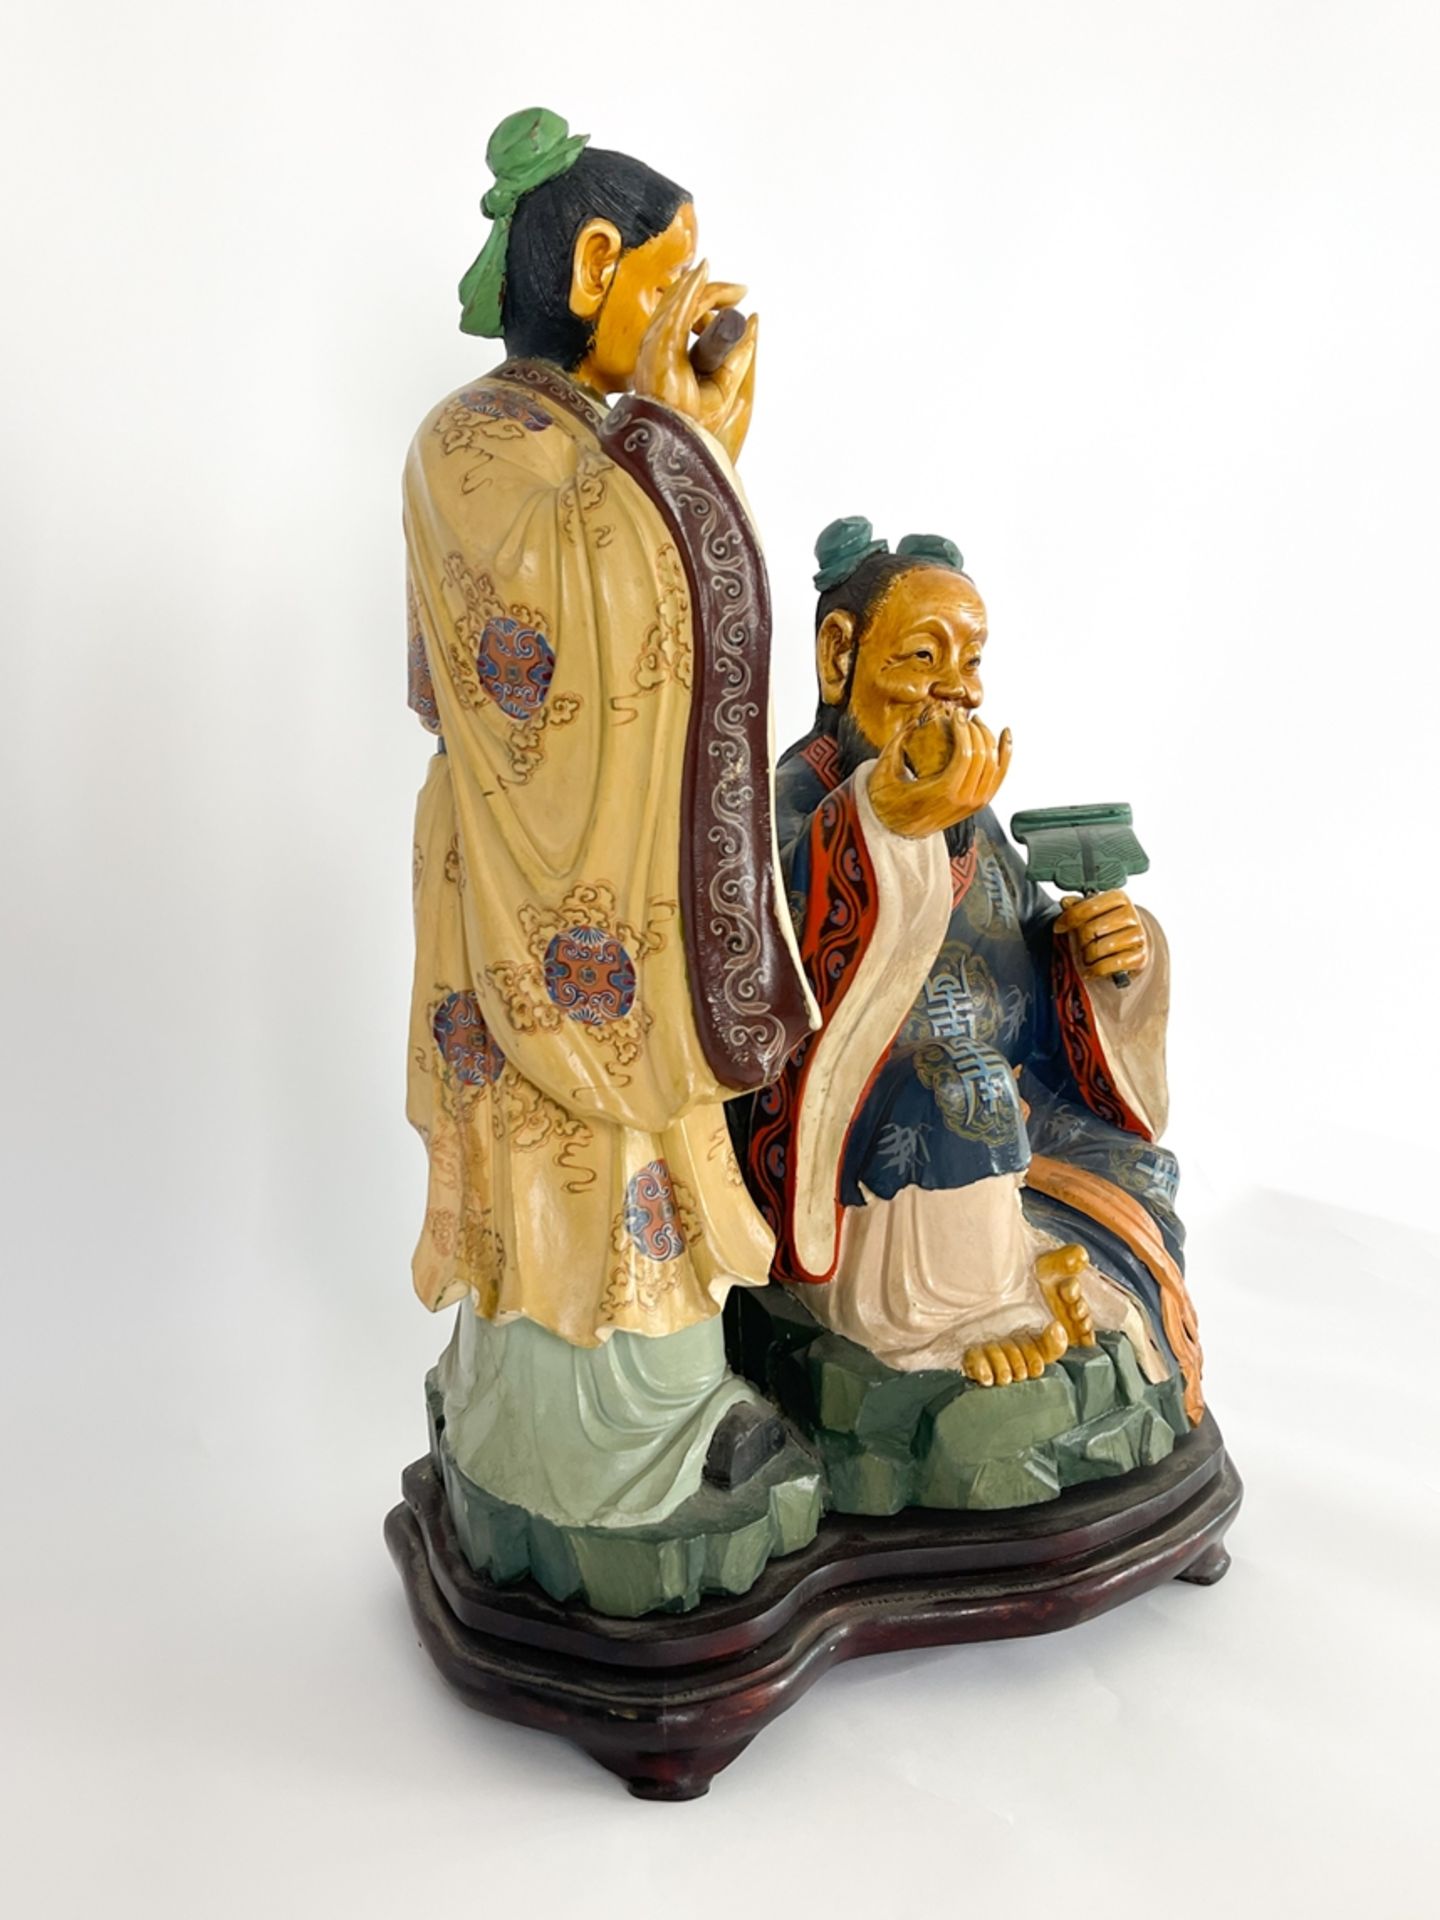 Chinese sculpture made from poplar wood and ivory - Image 2 of 13